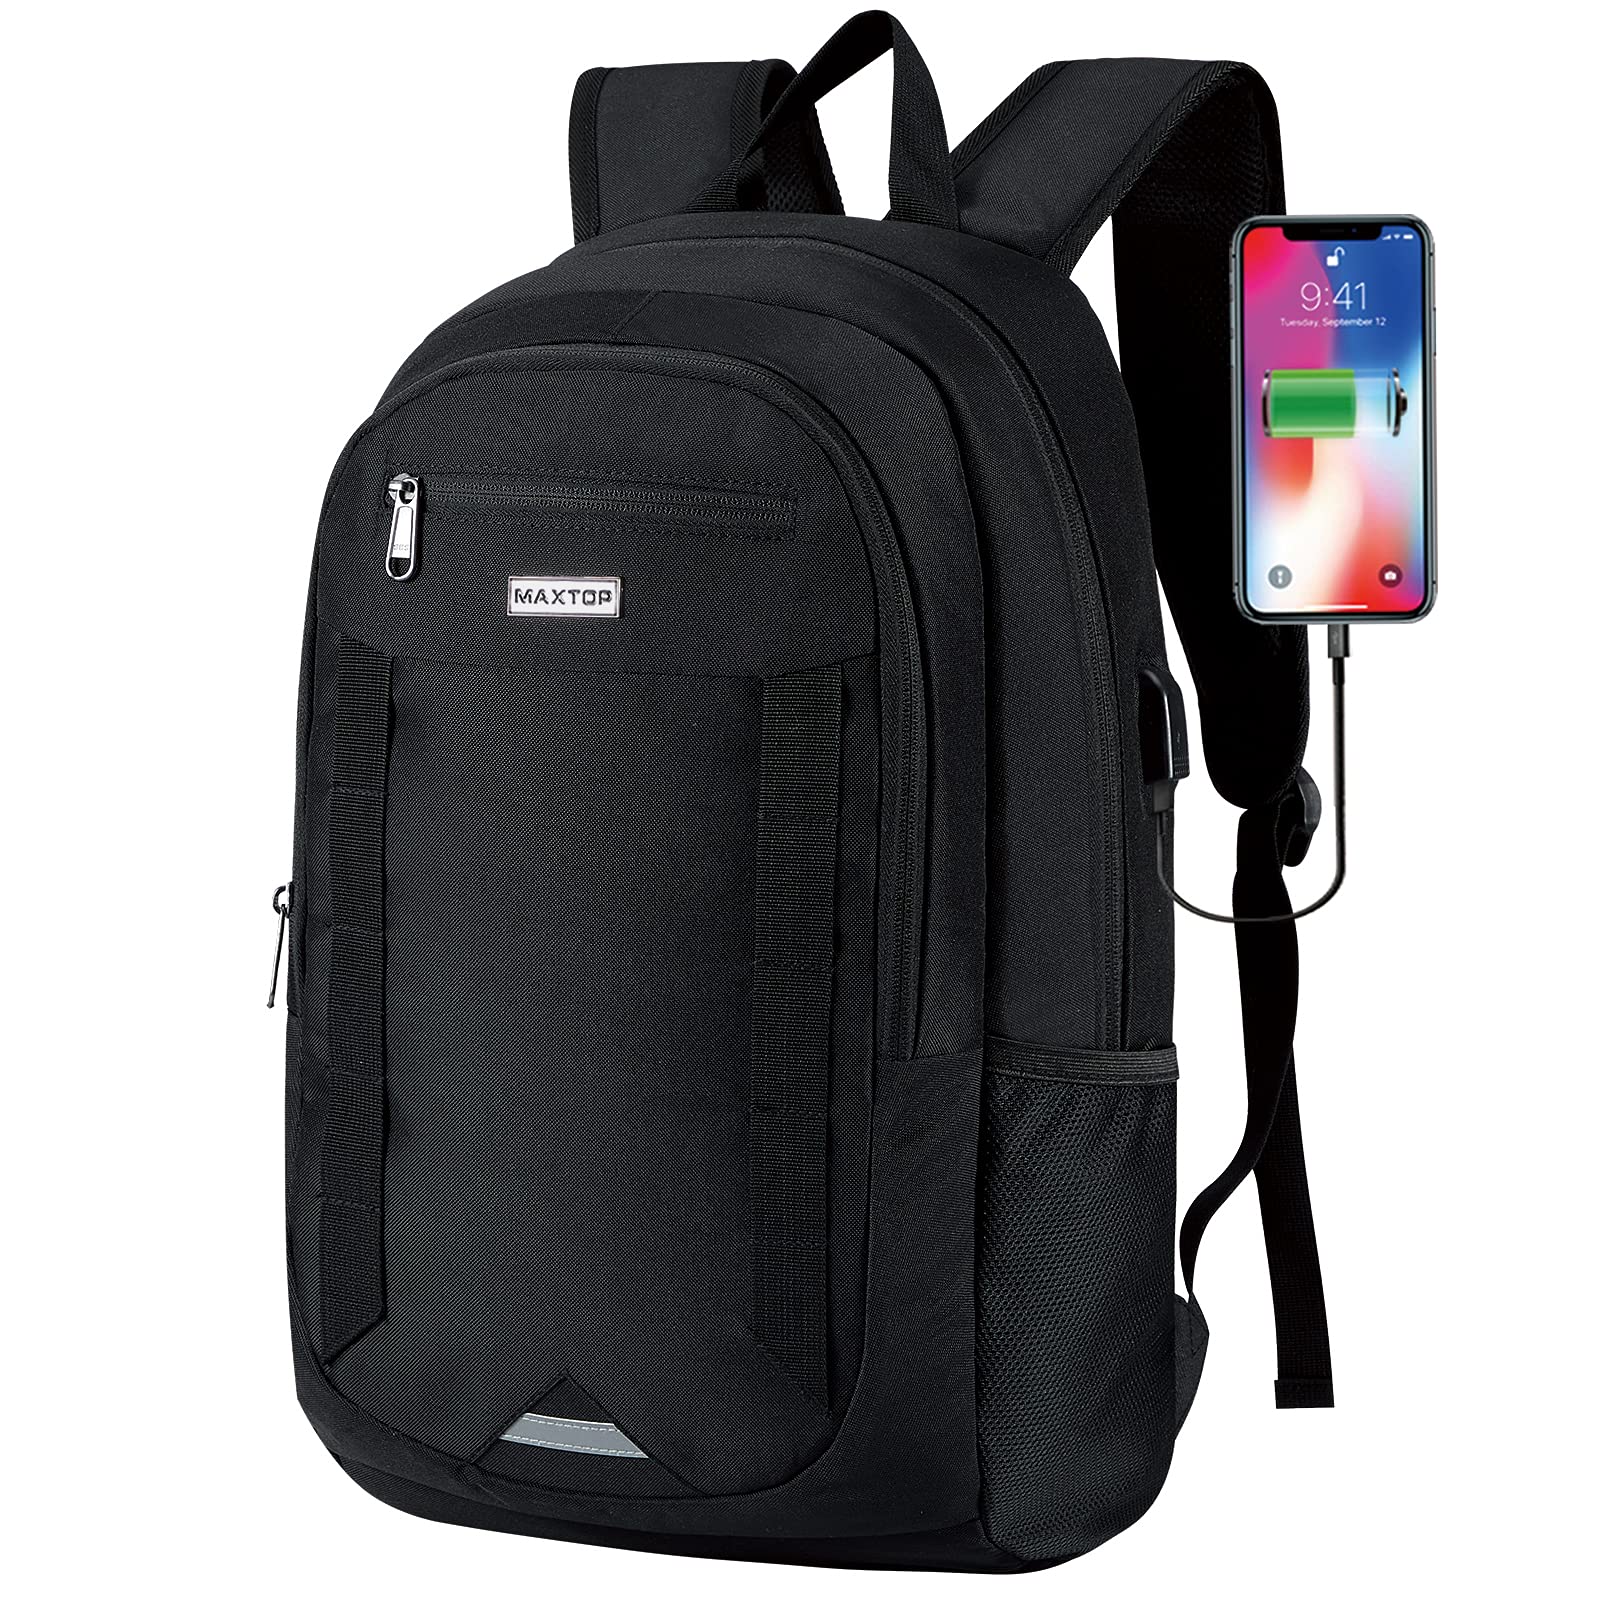 MAXTOP Laptop Backpack with P Charging Computer USB Business Backpacks